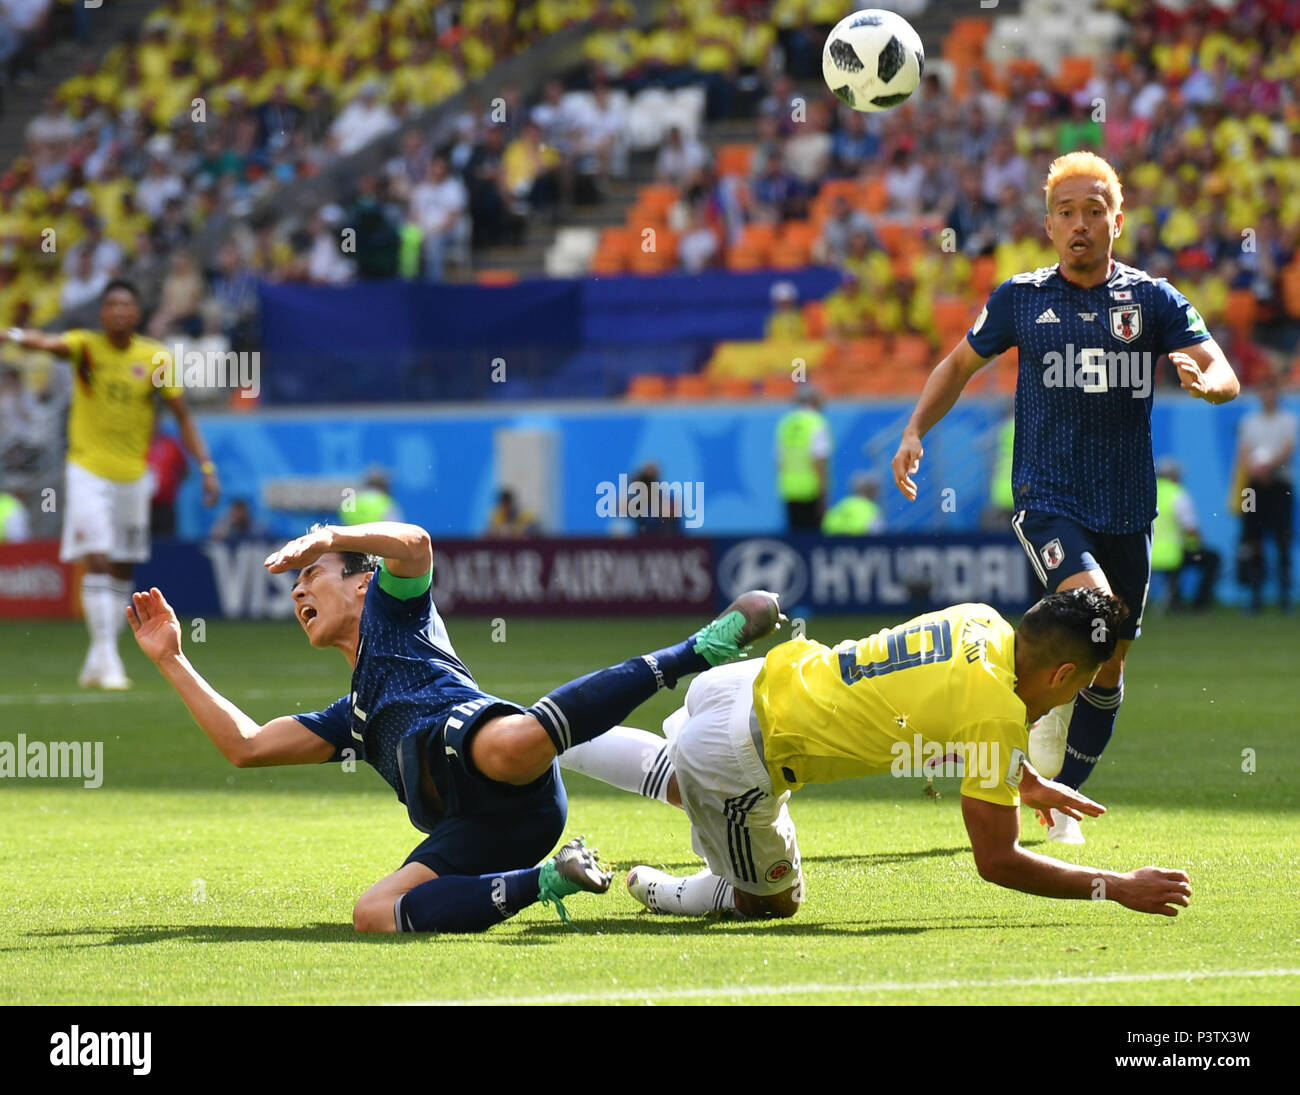 Saransk, Russia. 19th June, 2018. Radamel Falcao (2nd R) of Colombia competes during a Group H match between Colombia and Japan at the 2018 FIFA World Cup in Saransk, Russia, June 19, 2018. Credit: Lui Siu Wai/Xinhua/Alamy Live News Stock Photo